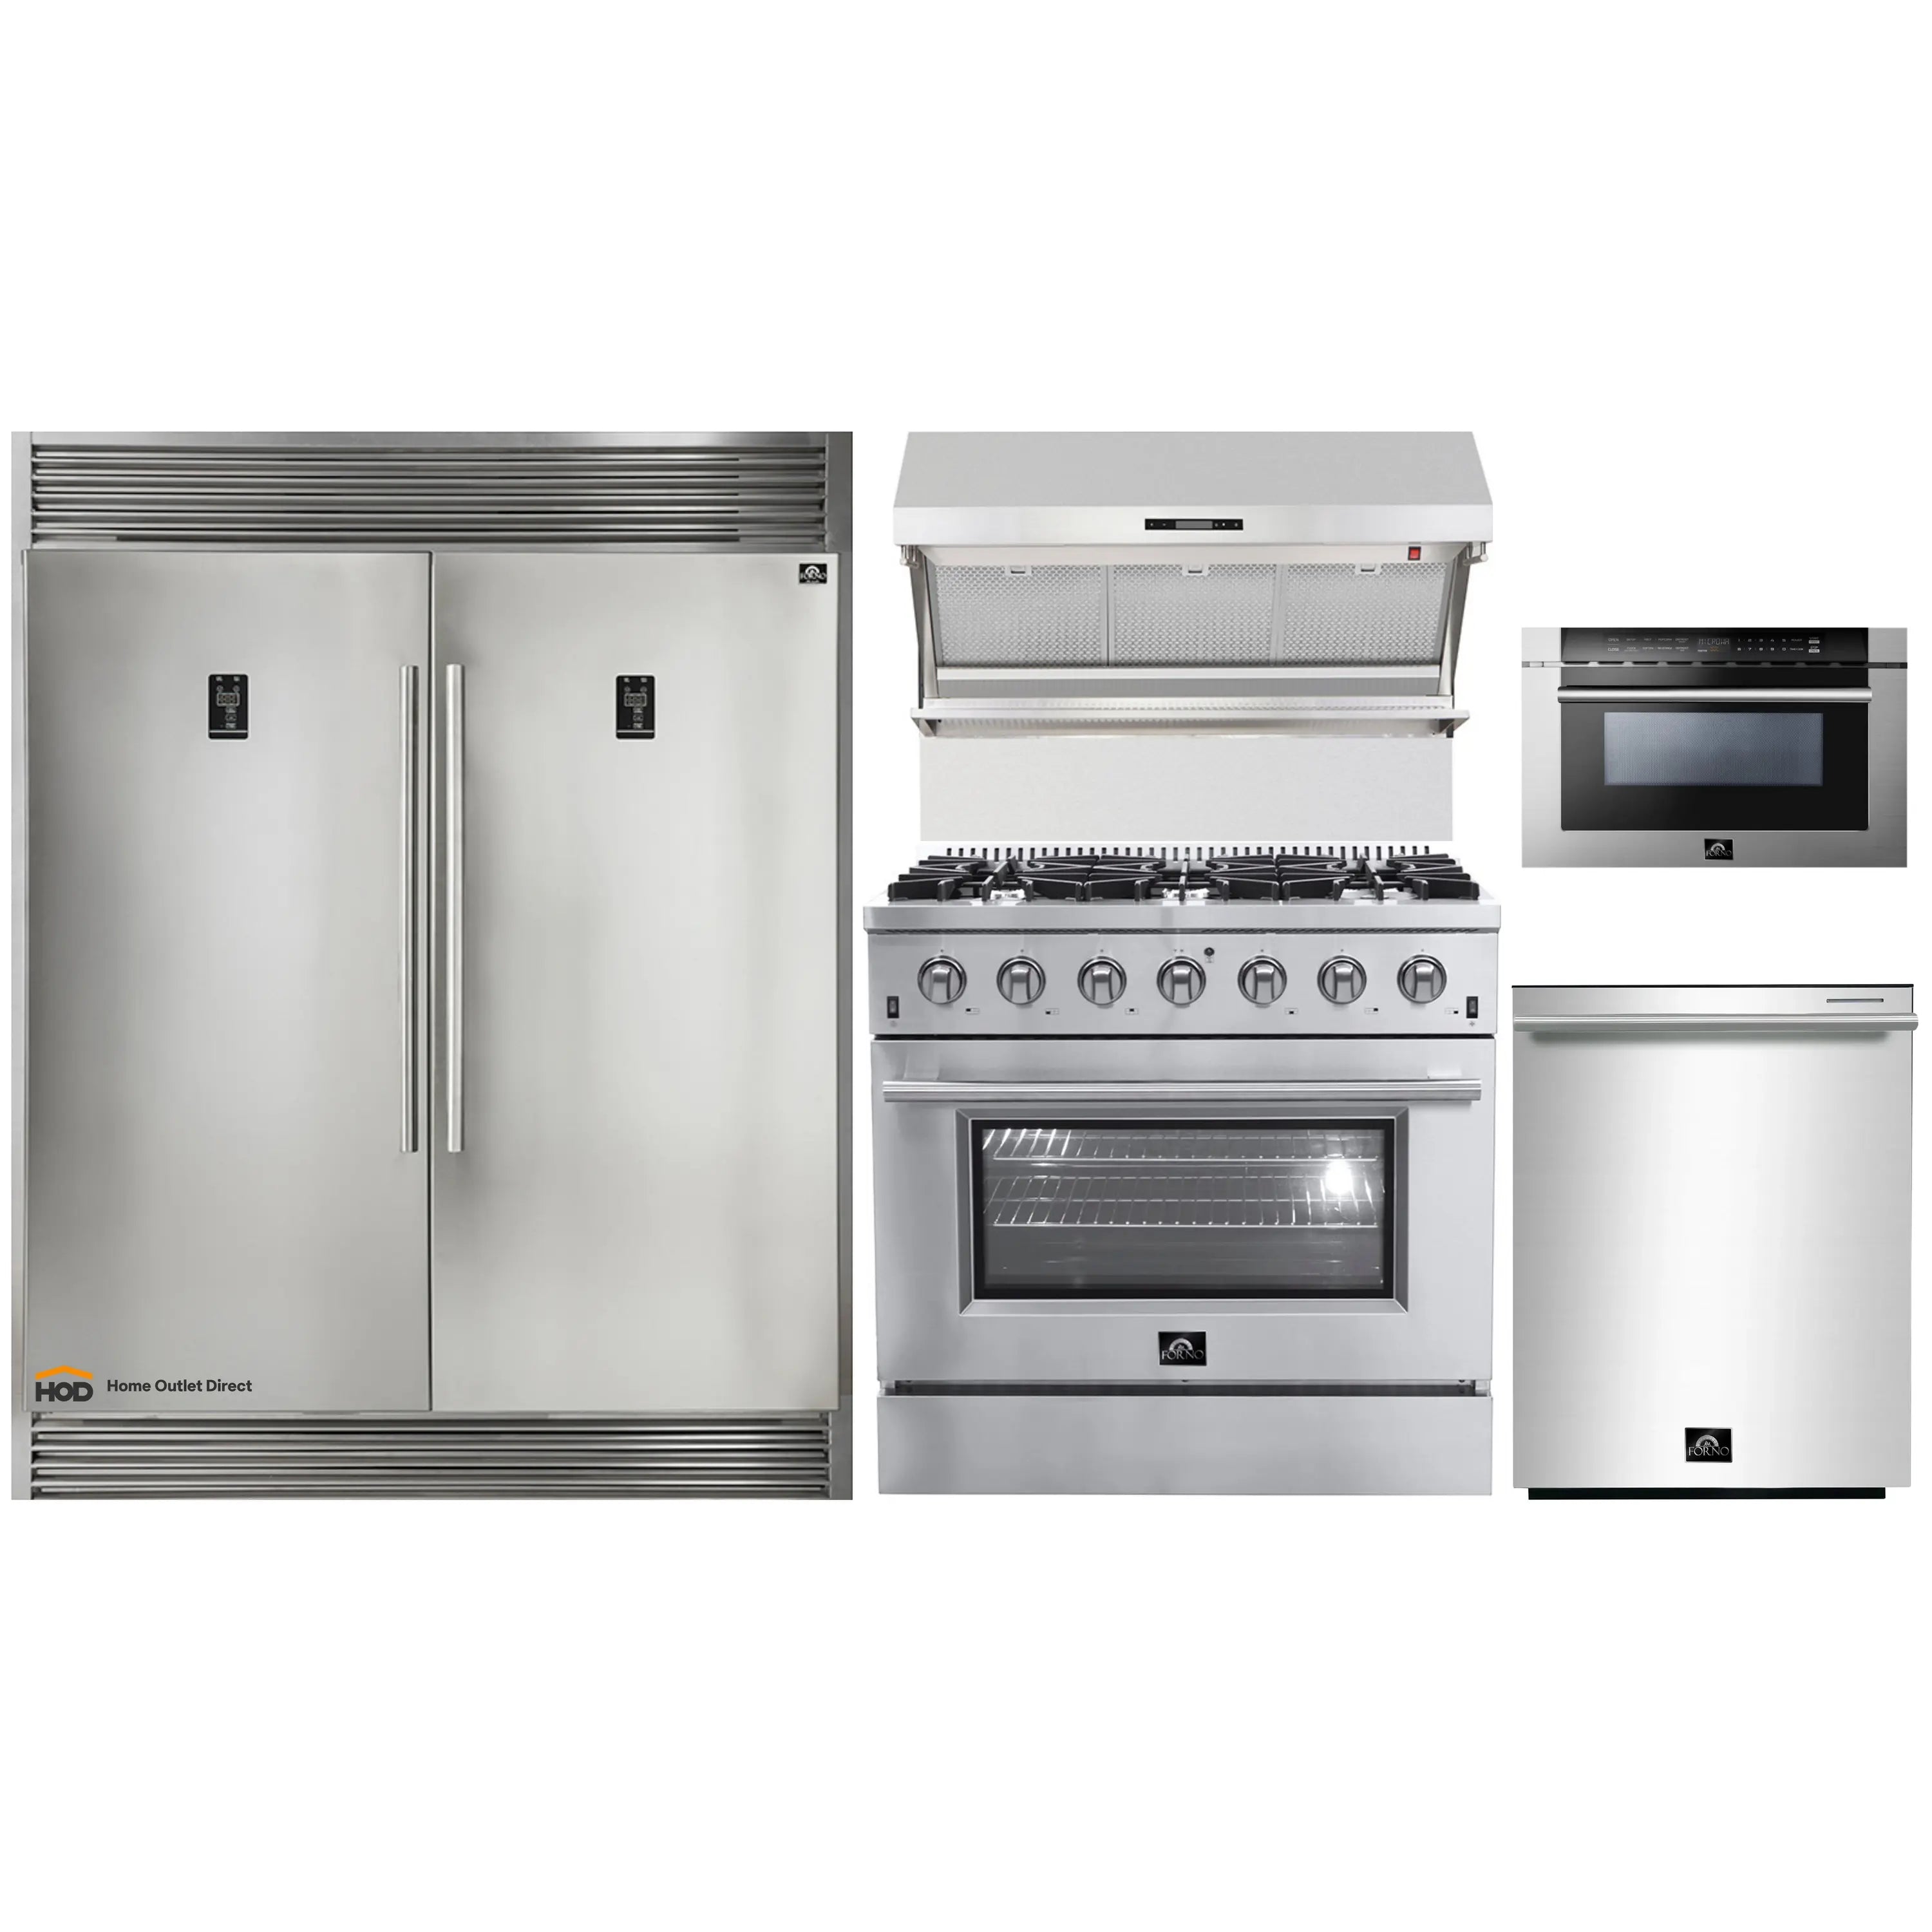 Forno 5-Piece Appliance Package - 36-Inch Gas Range, 56-Inch Pro-Style Refrigerator, Wall Mount Hood with Backsplash, Microwave Drawer, & 3-Rack Dishwasher in Stainless Steel